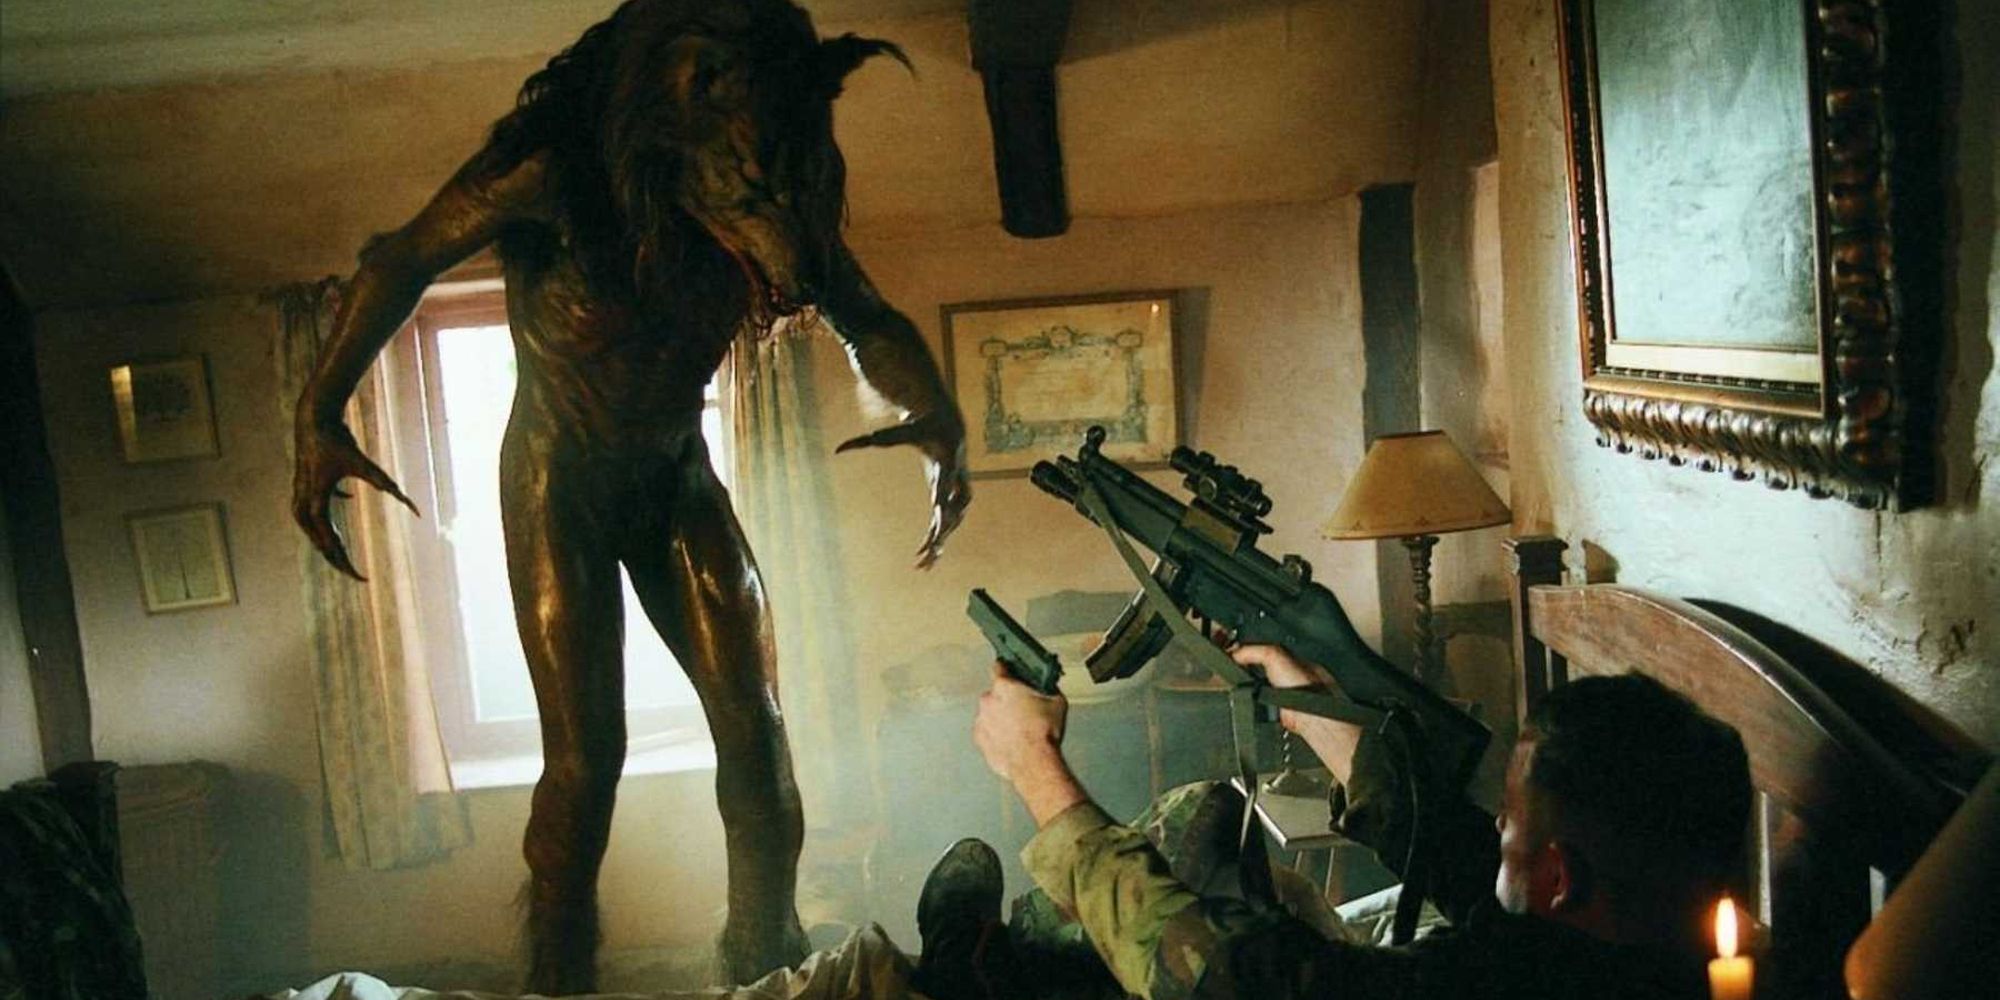 Werewolf standing over a soldier in Dog Soldiers (2002)